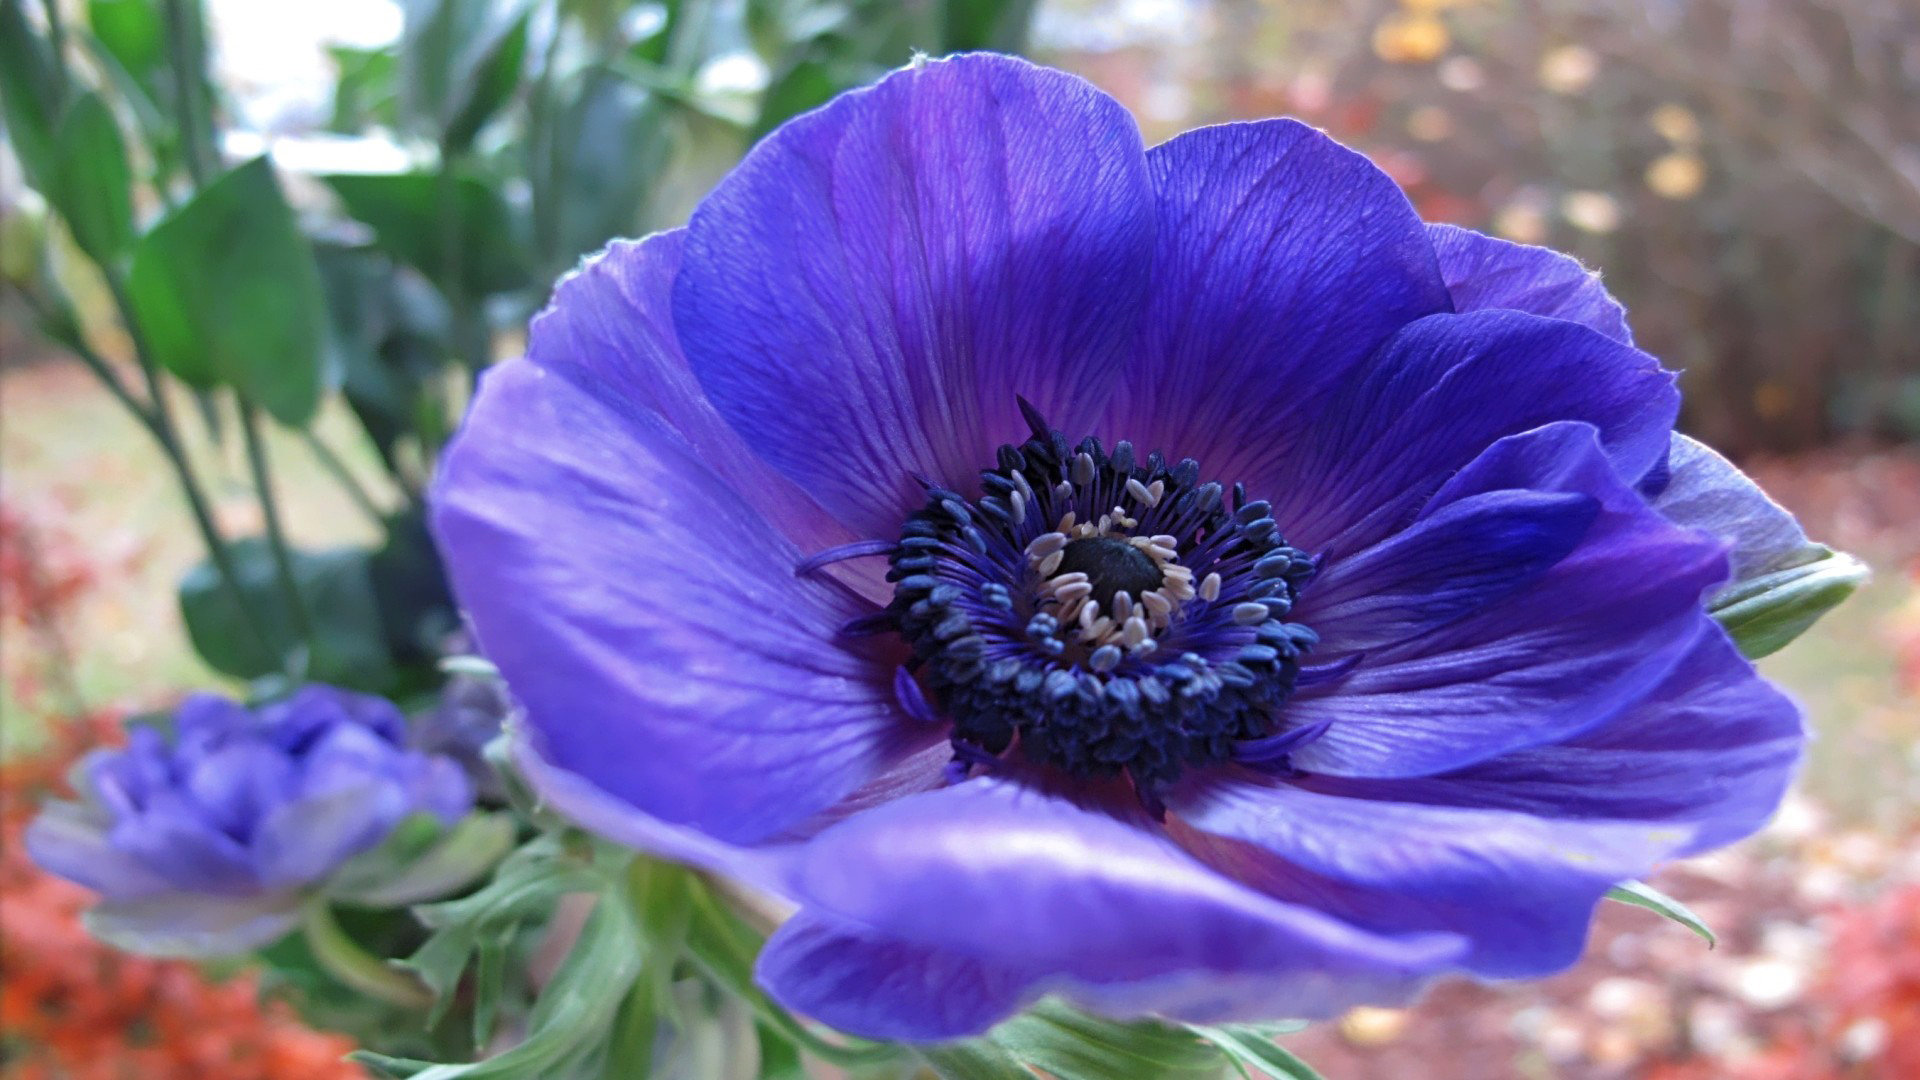 Download Full Hd 1080p Anemone Pc Wallpaper Id For Free